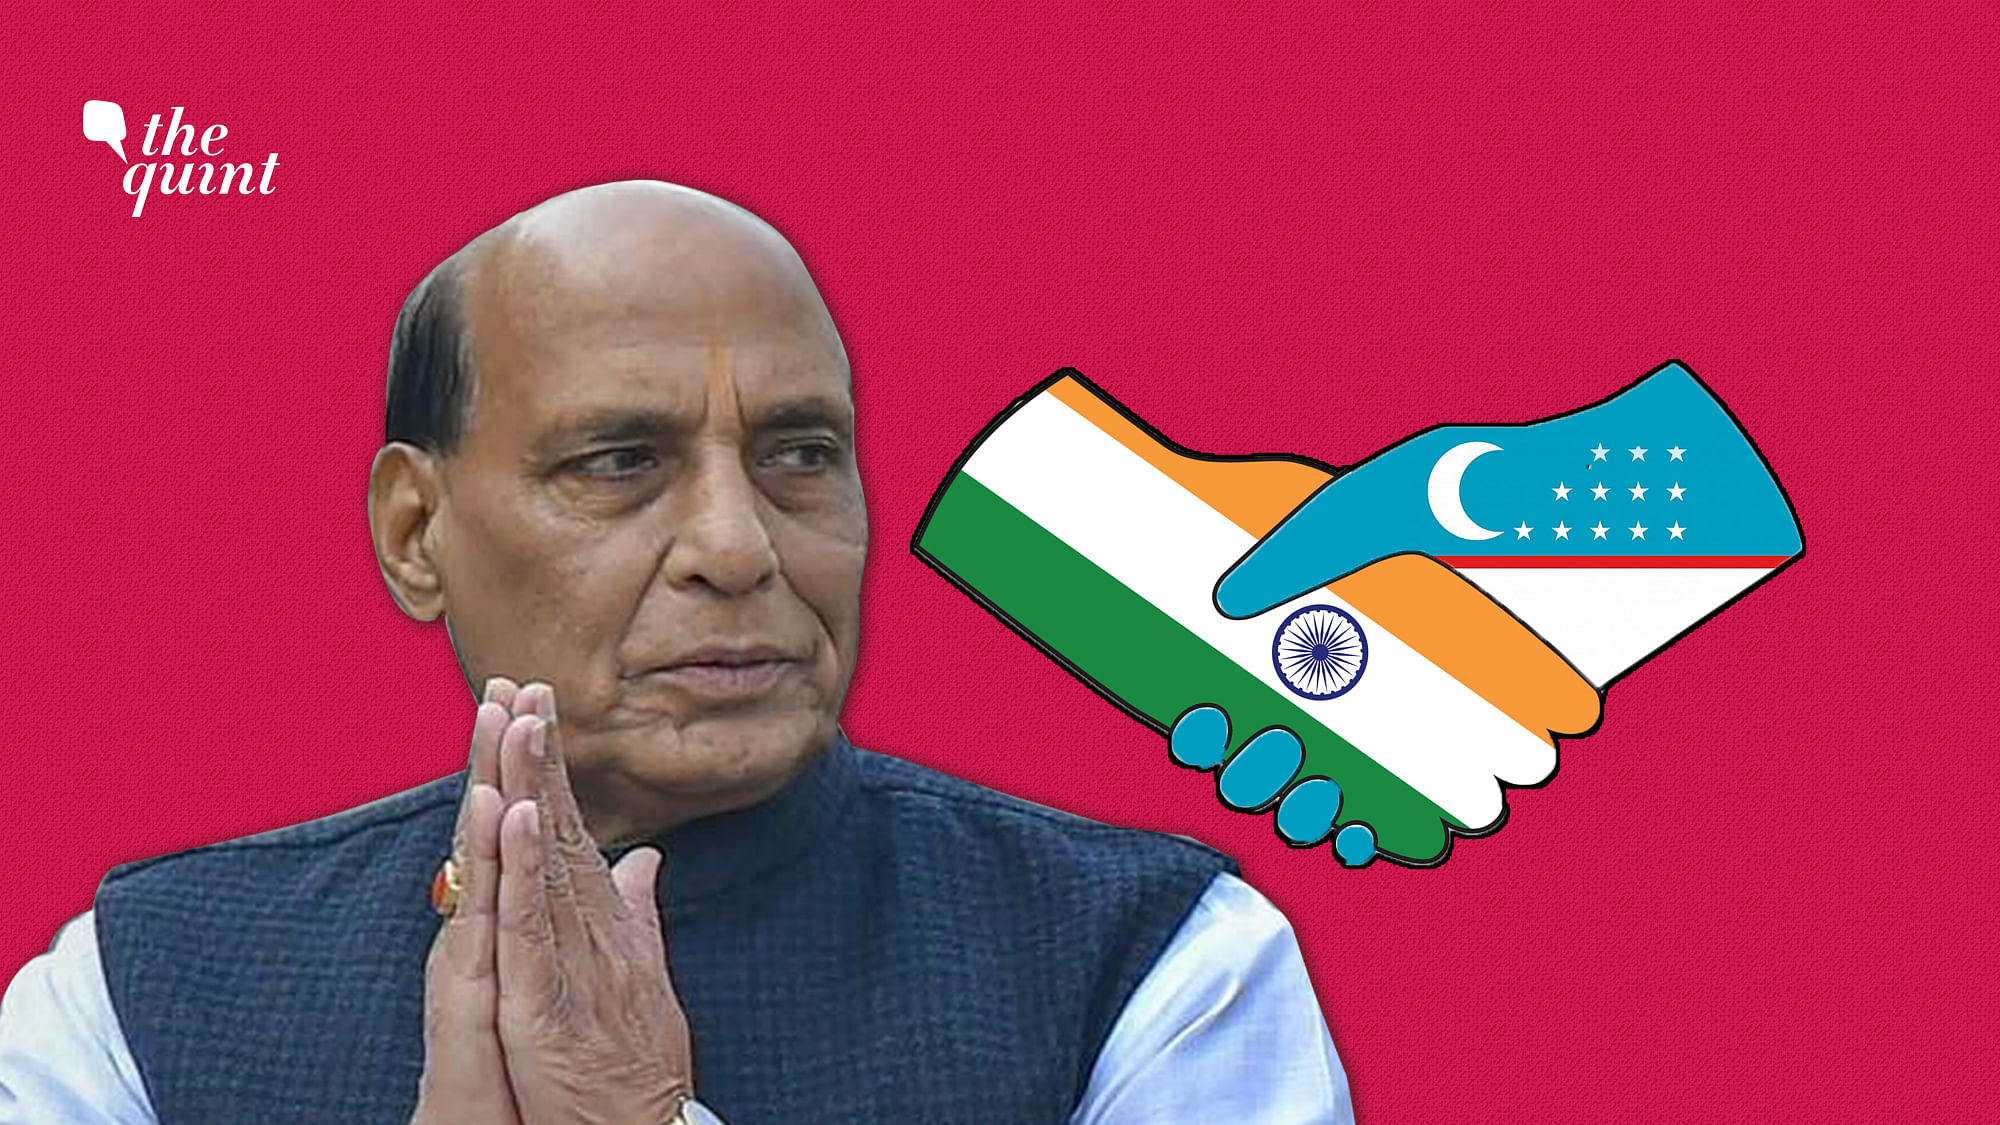 Image of India’s defence minister Rajnath Singh, India and Uzbekistan’s flags shaking hands — image used for representational purposes.